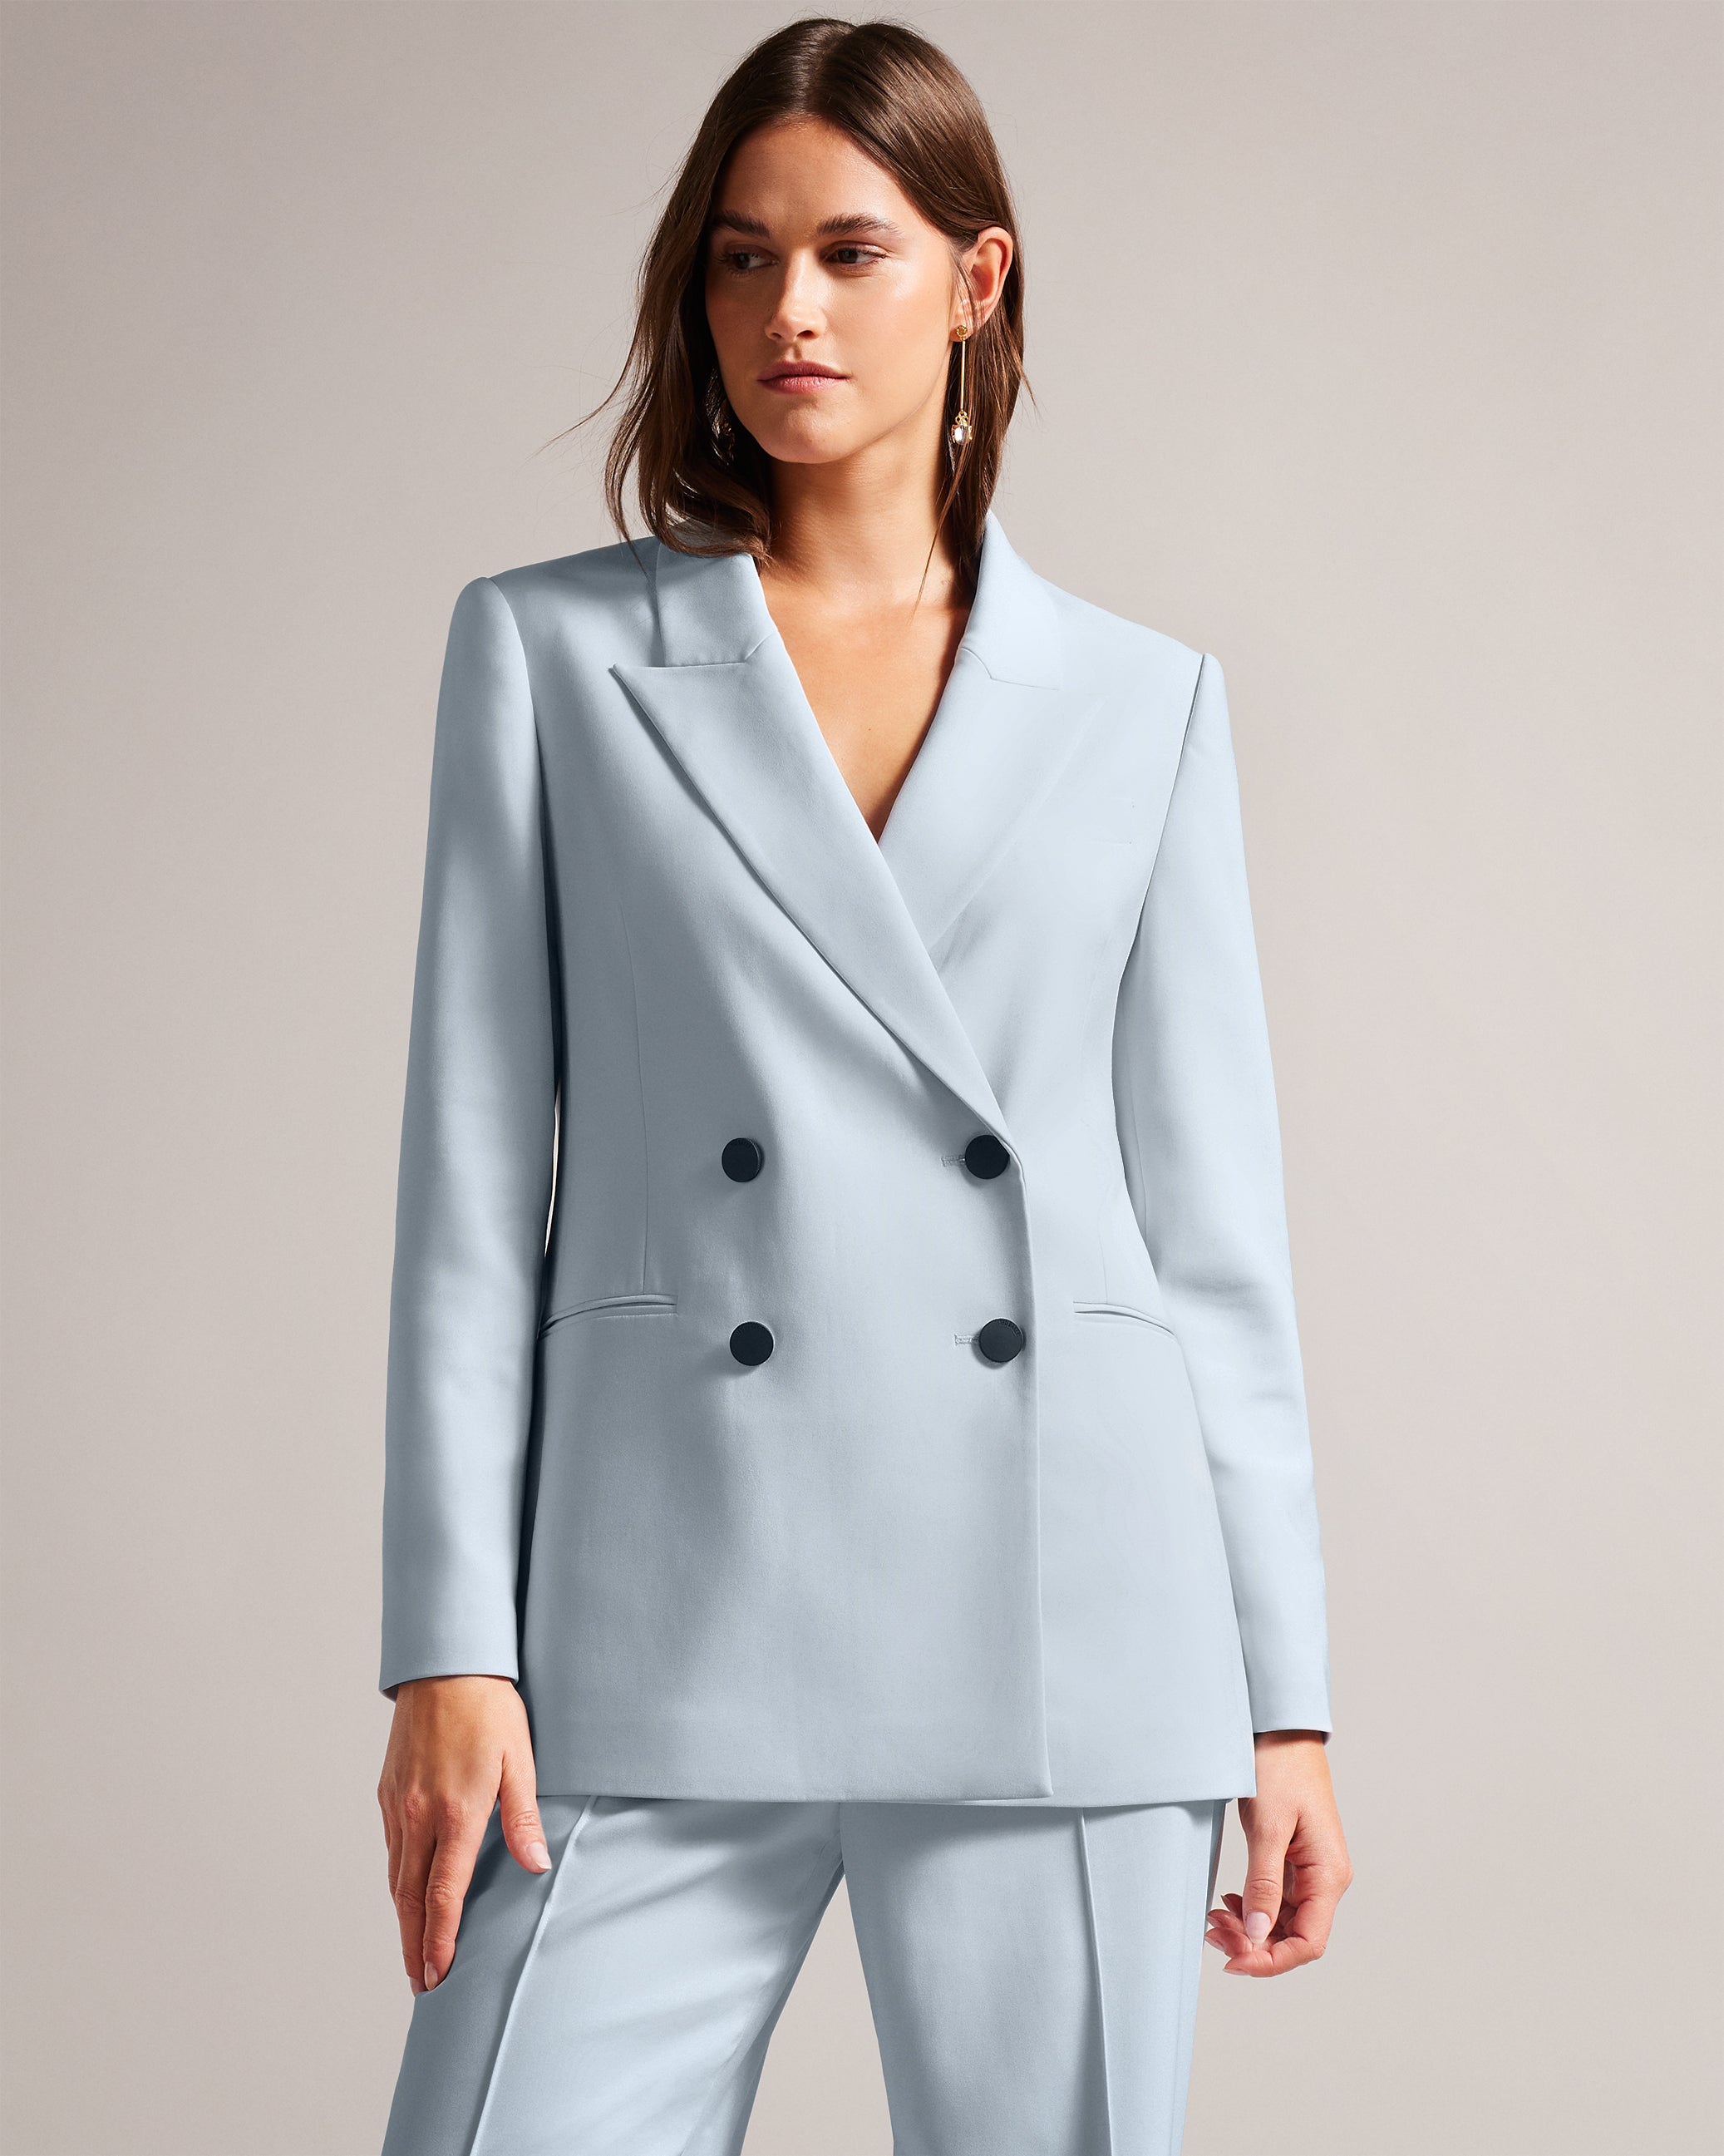 HILDIA - Long Line Double Breasted Jacket – Ted Baker, United States